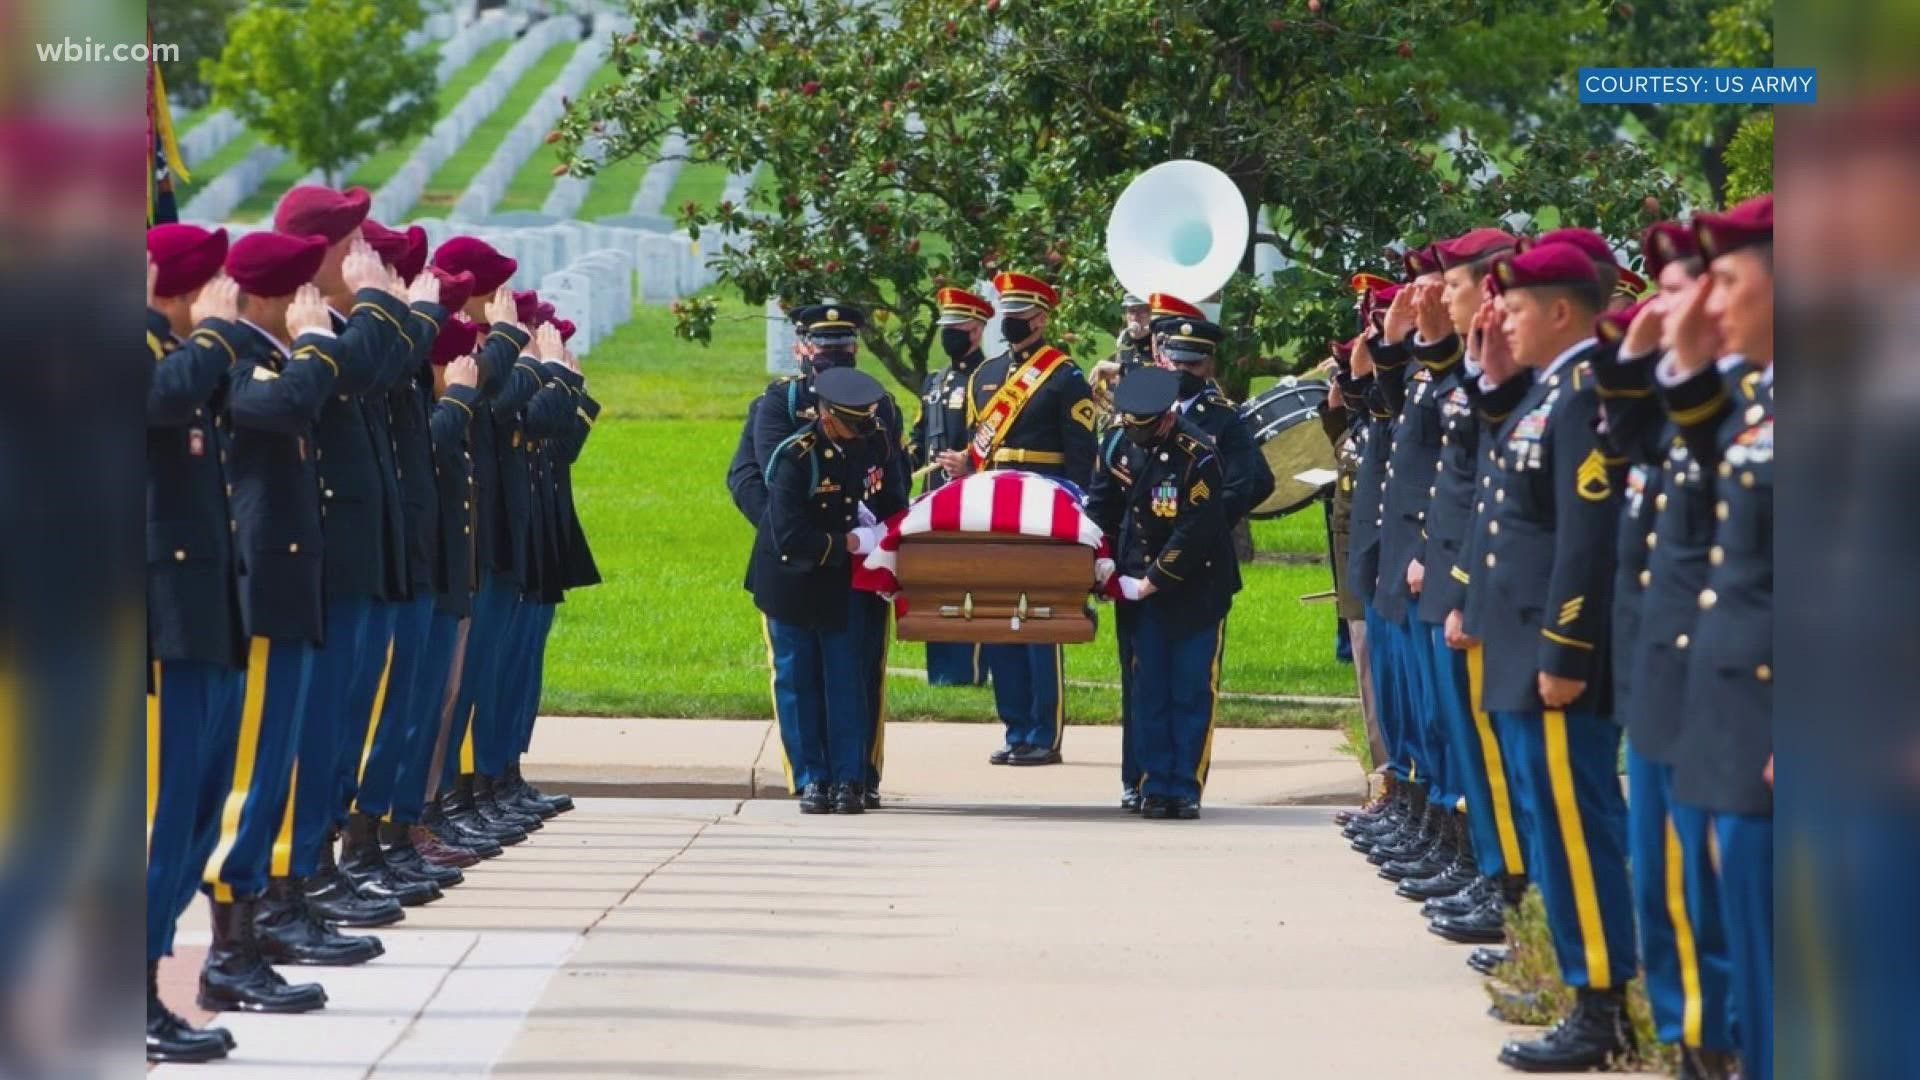 A grateful nation honored U.S. Army Staff Sgt. Ryan Knauss on Tuesday, bidding him farewell in a private funeral service at Arlington National Cemetery.